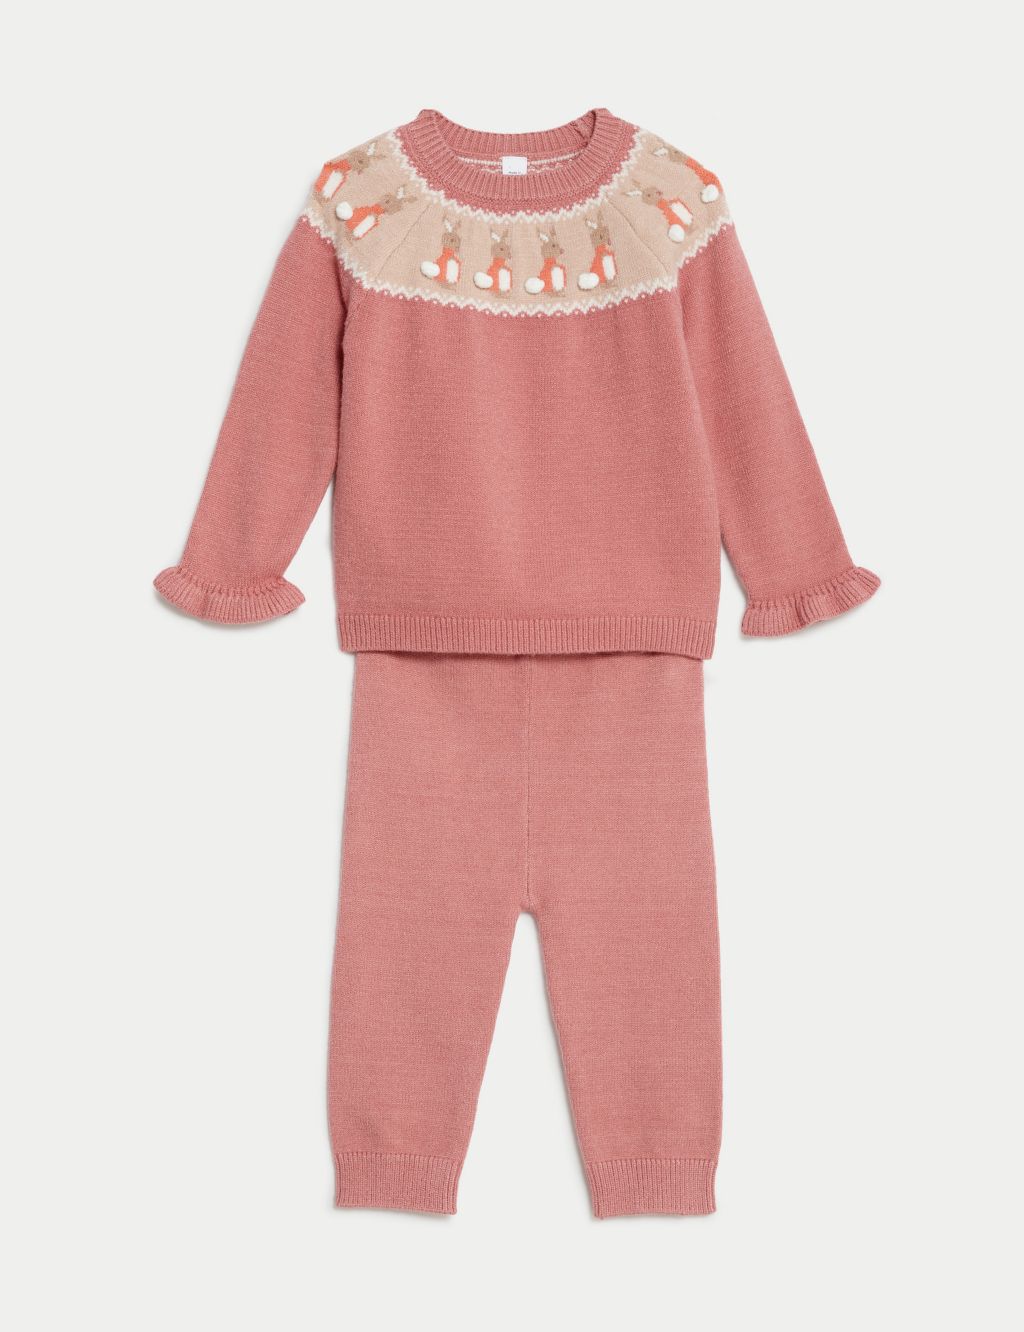 2pc Peter Rabbit™ Knitted Outfit (0-3 Yrs) image 2